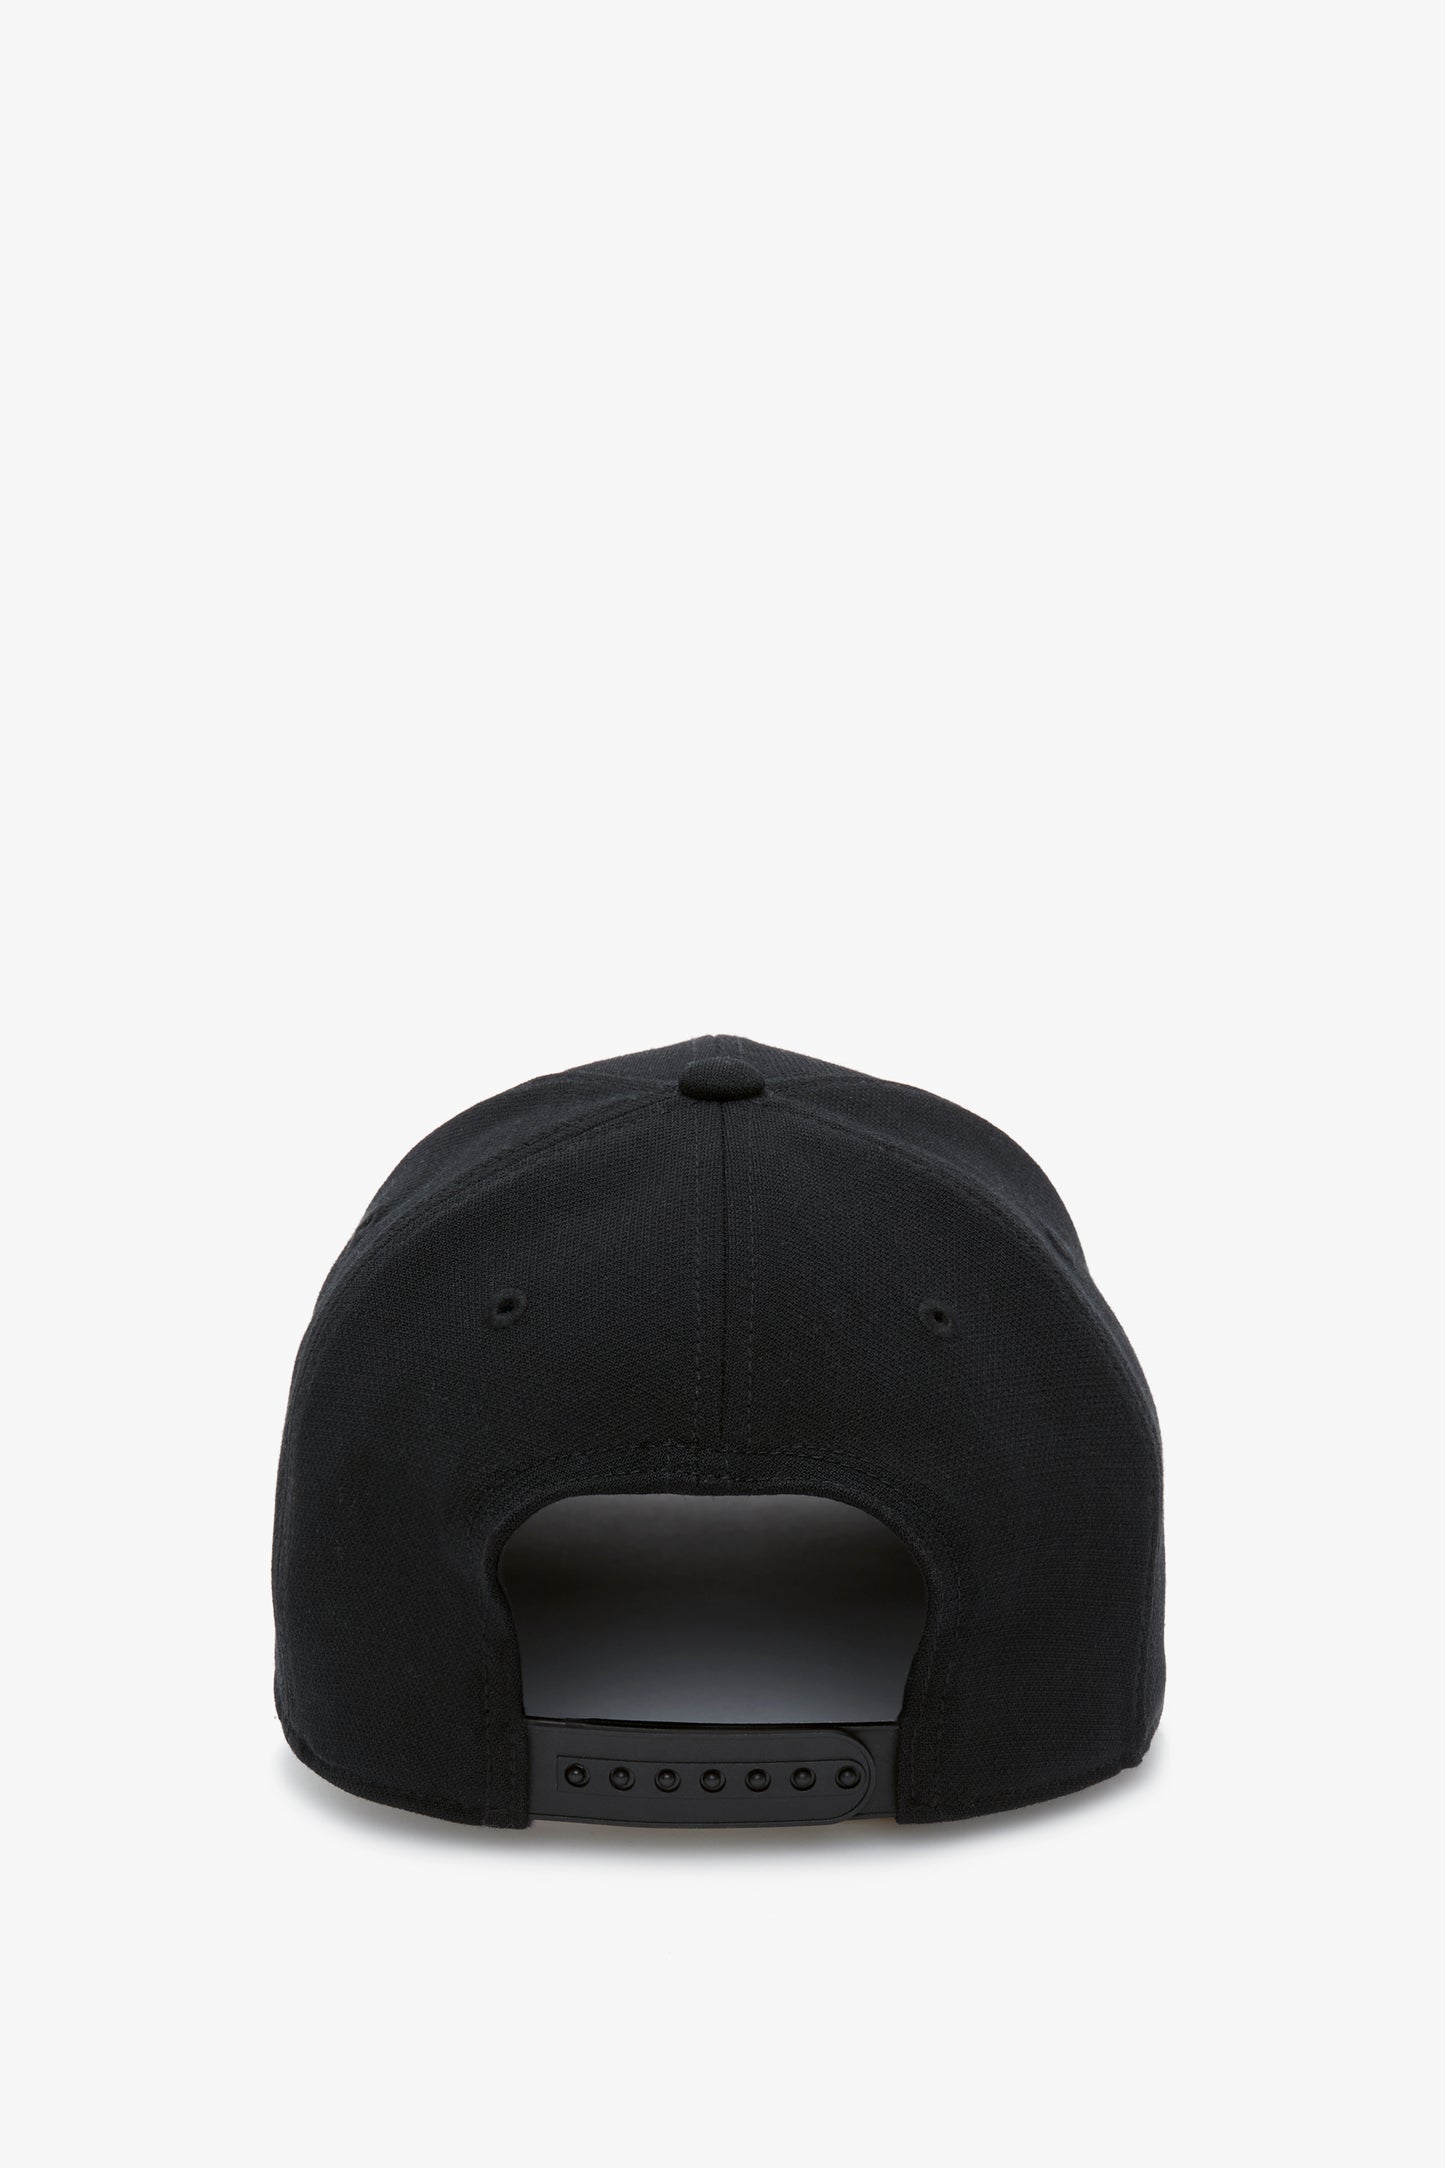 Exclusive Logo Cap in Black by Victoria Beckham viewed from the back, featuring a flat brim and adjustable strap with multiple black snap closures on a white background.